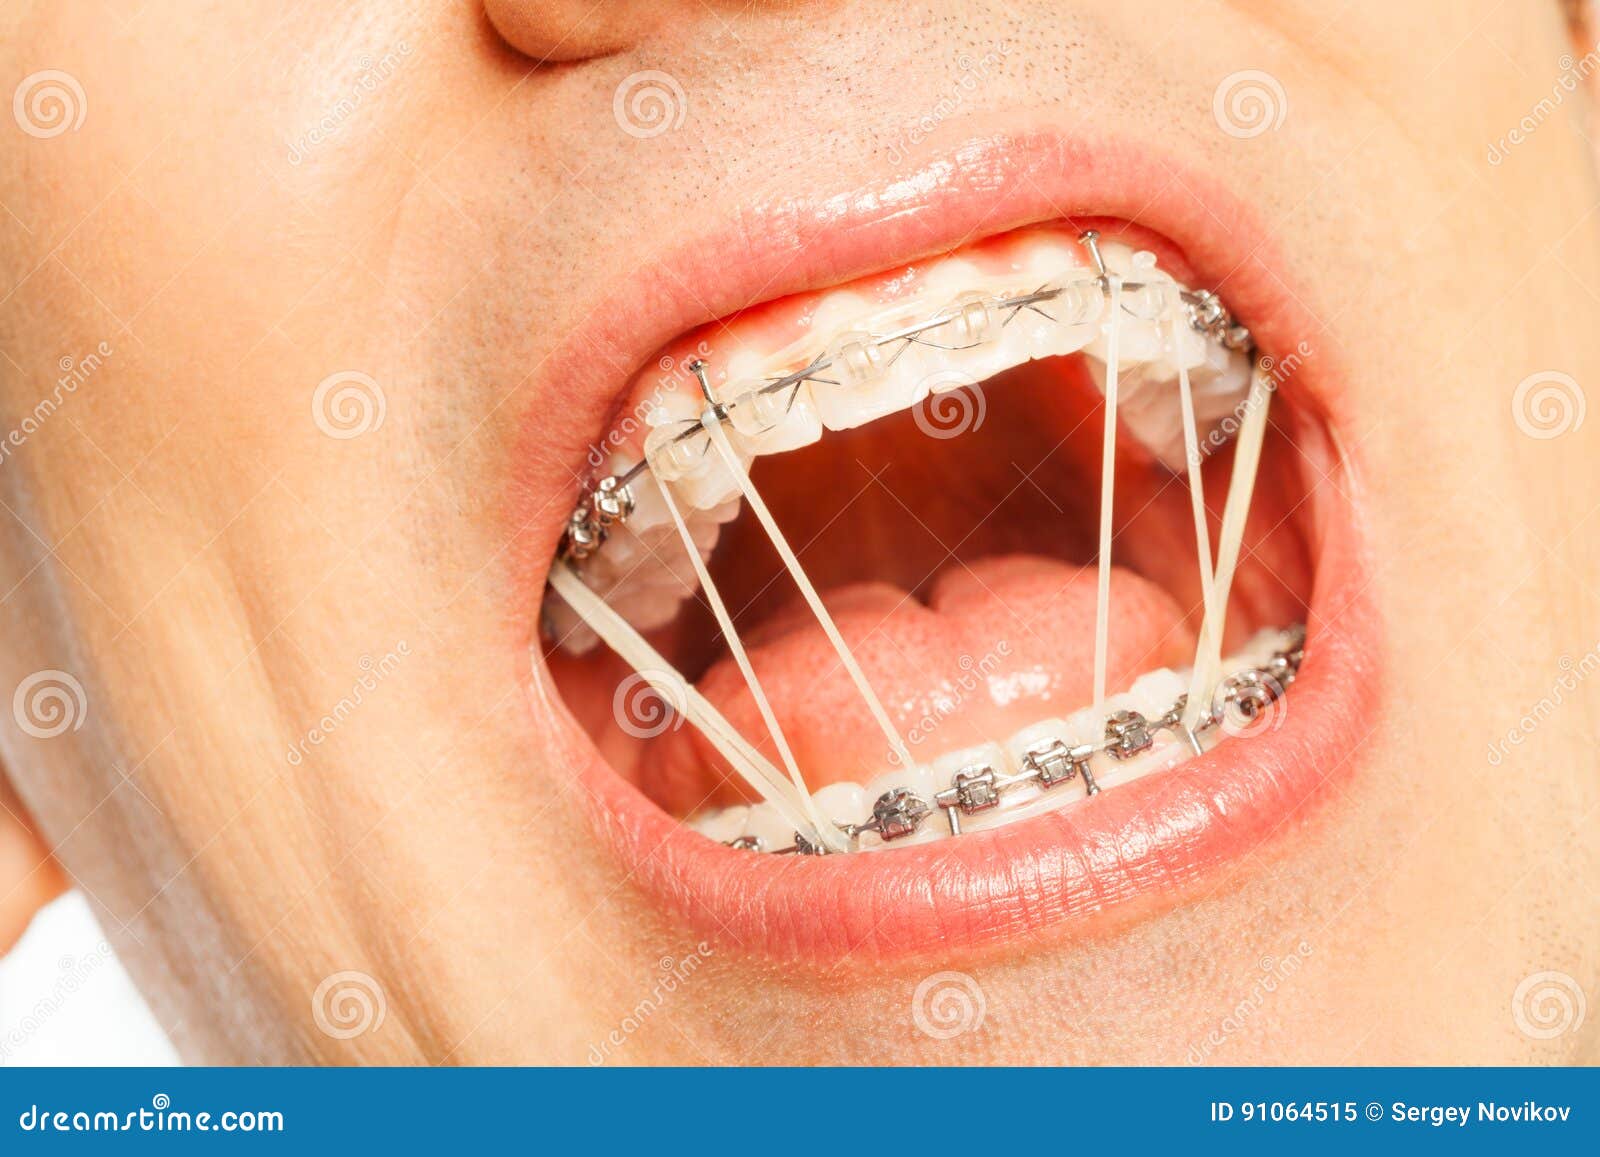 man mouth with latex rings on braces